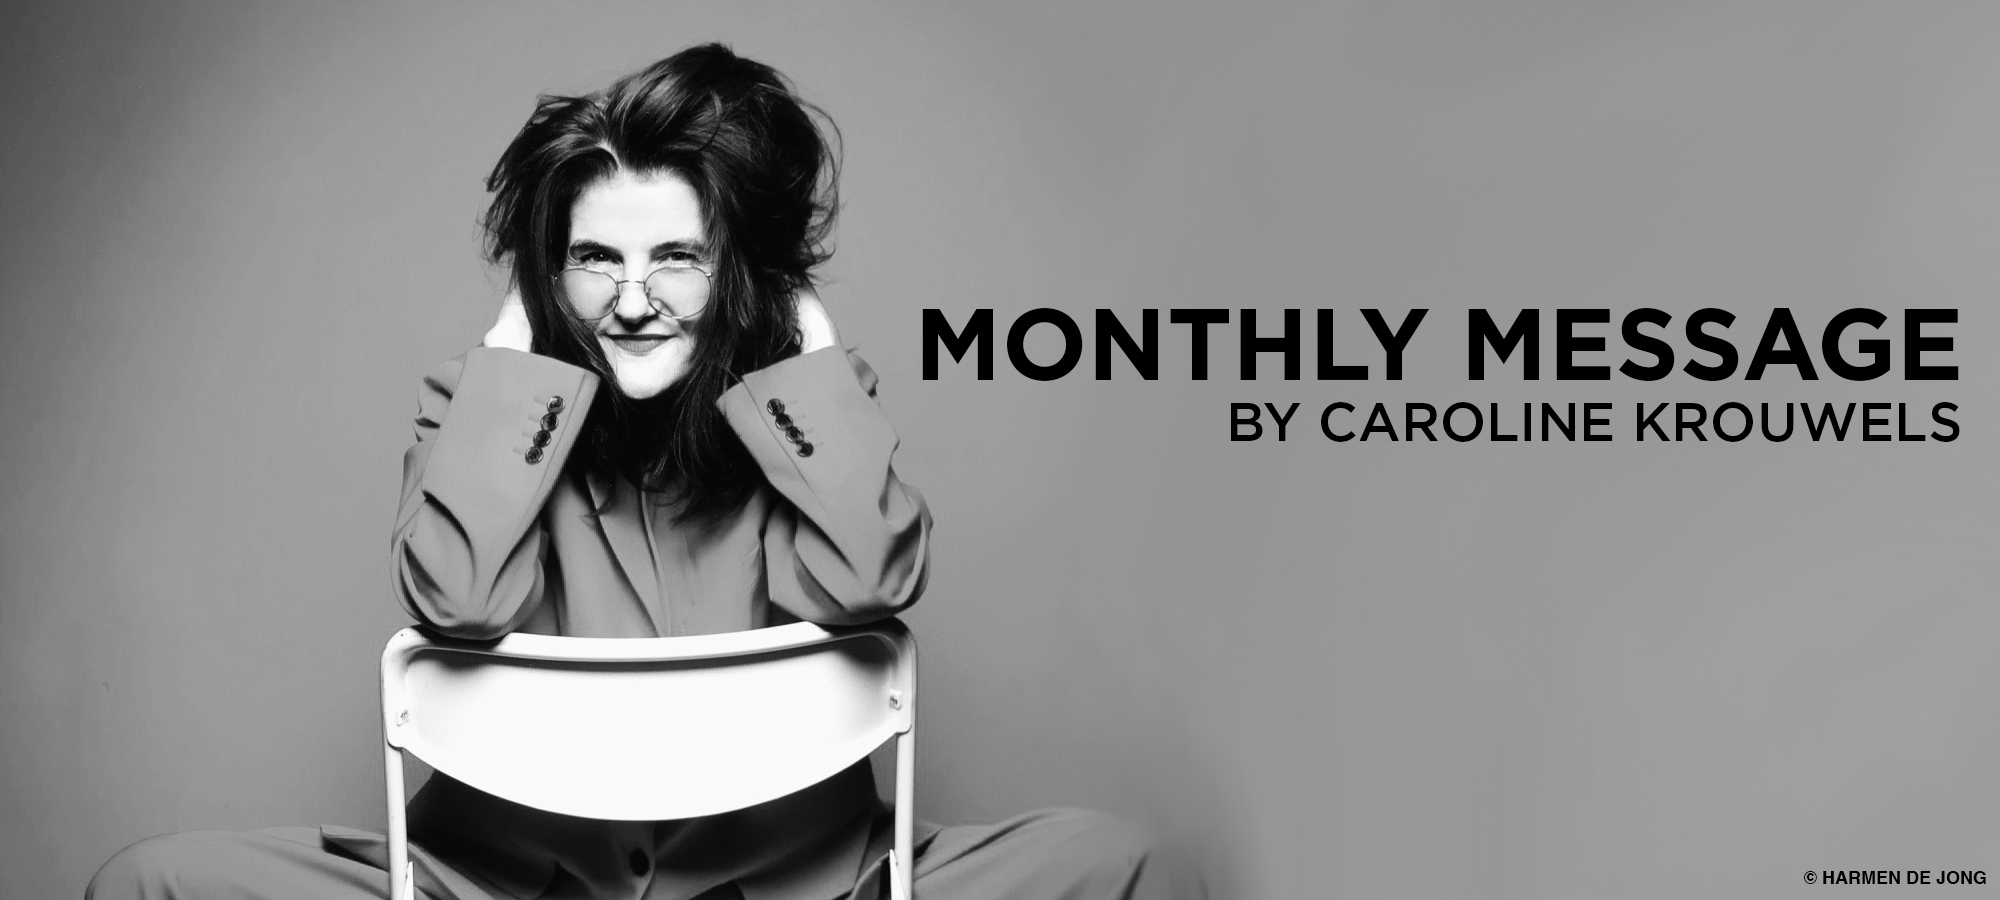 Carolines Monthly Message: THINK BACK, LOOK FORWARD